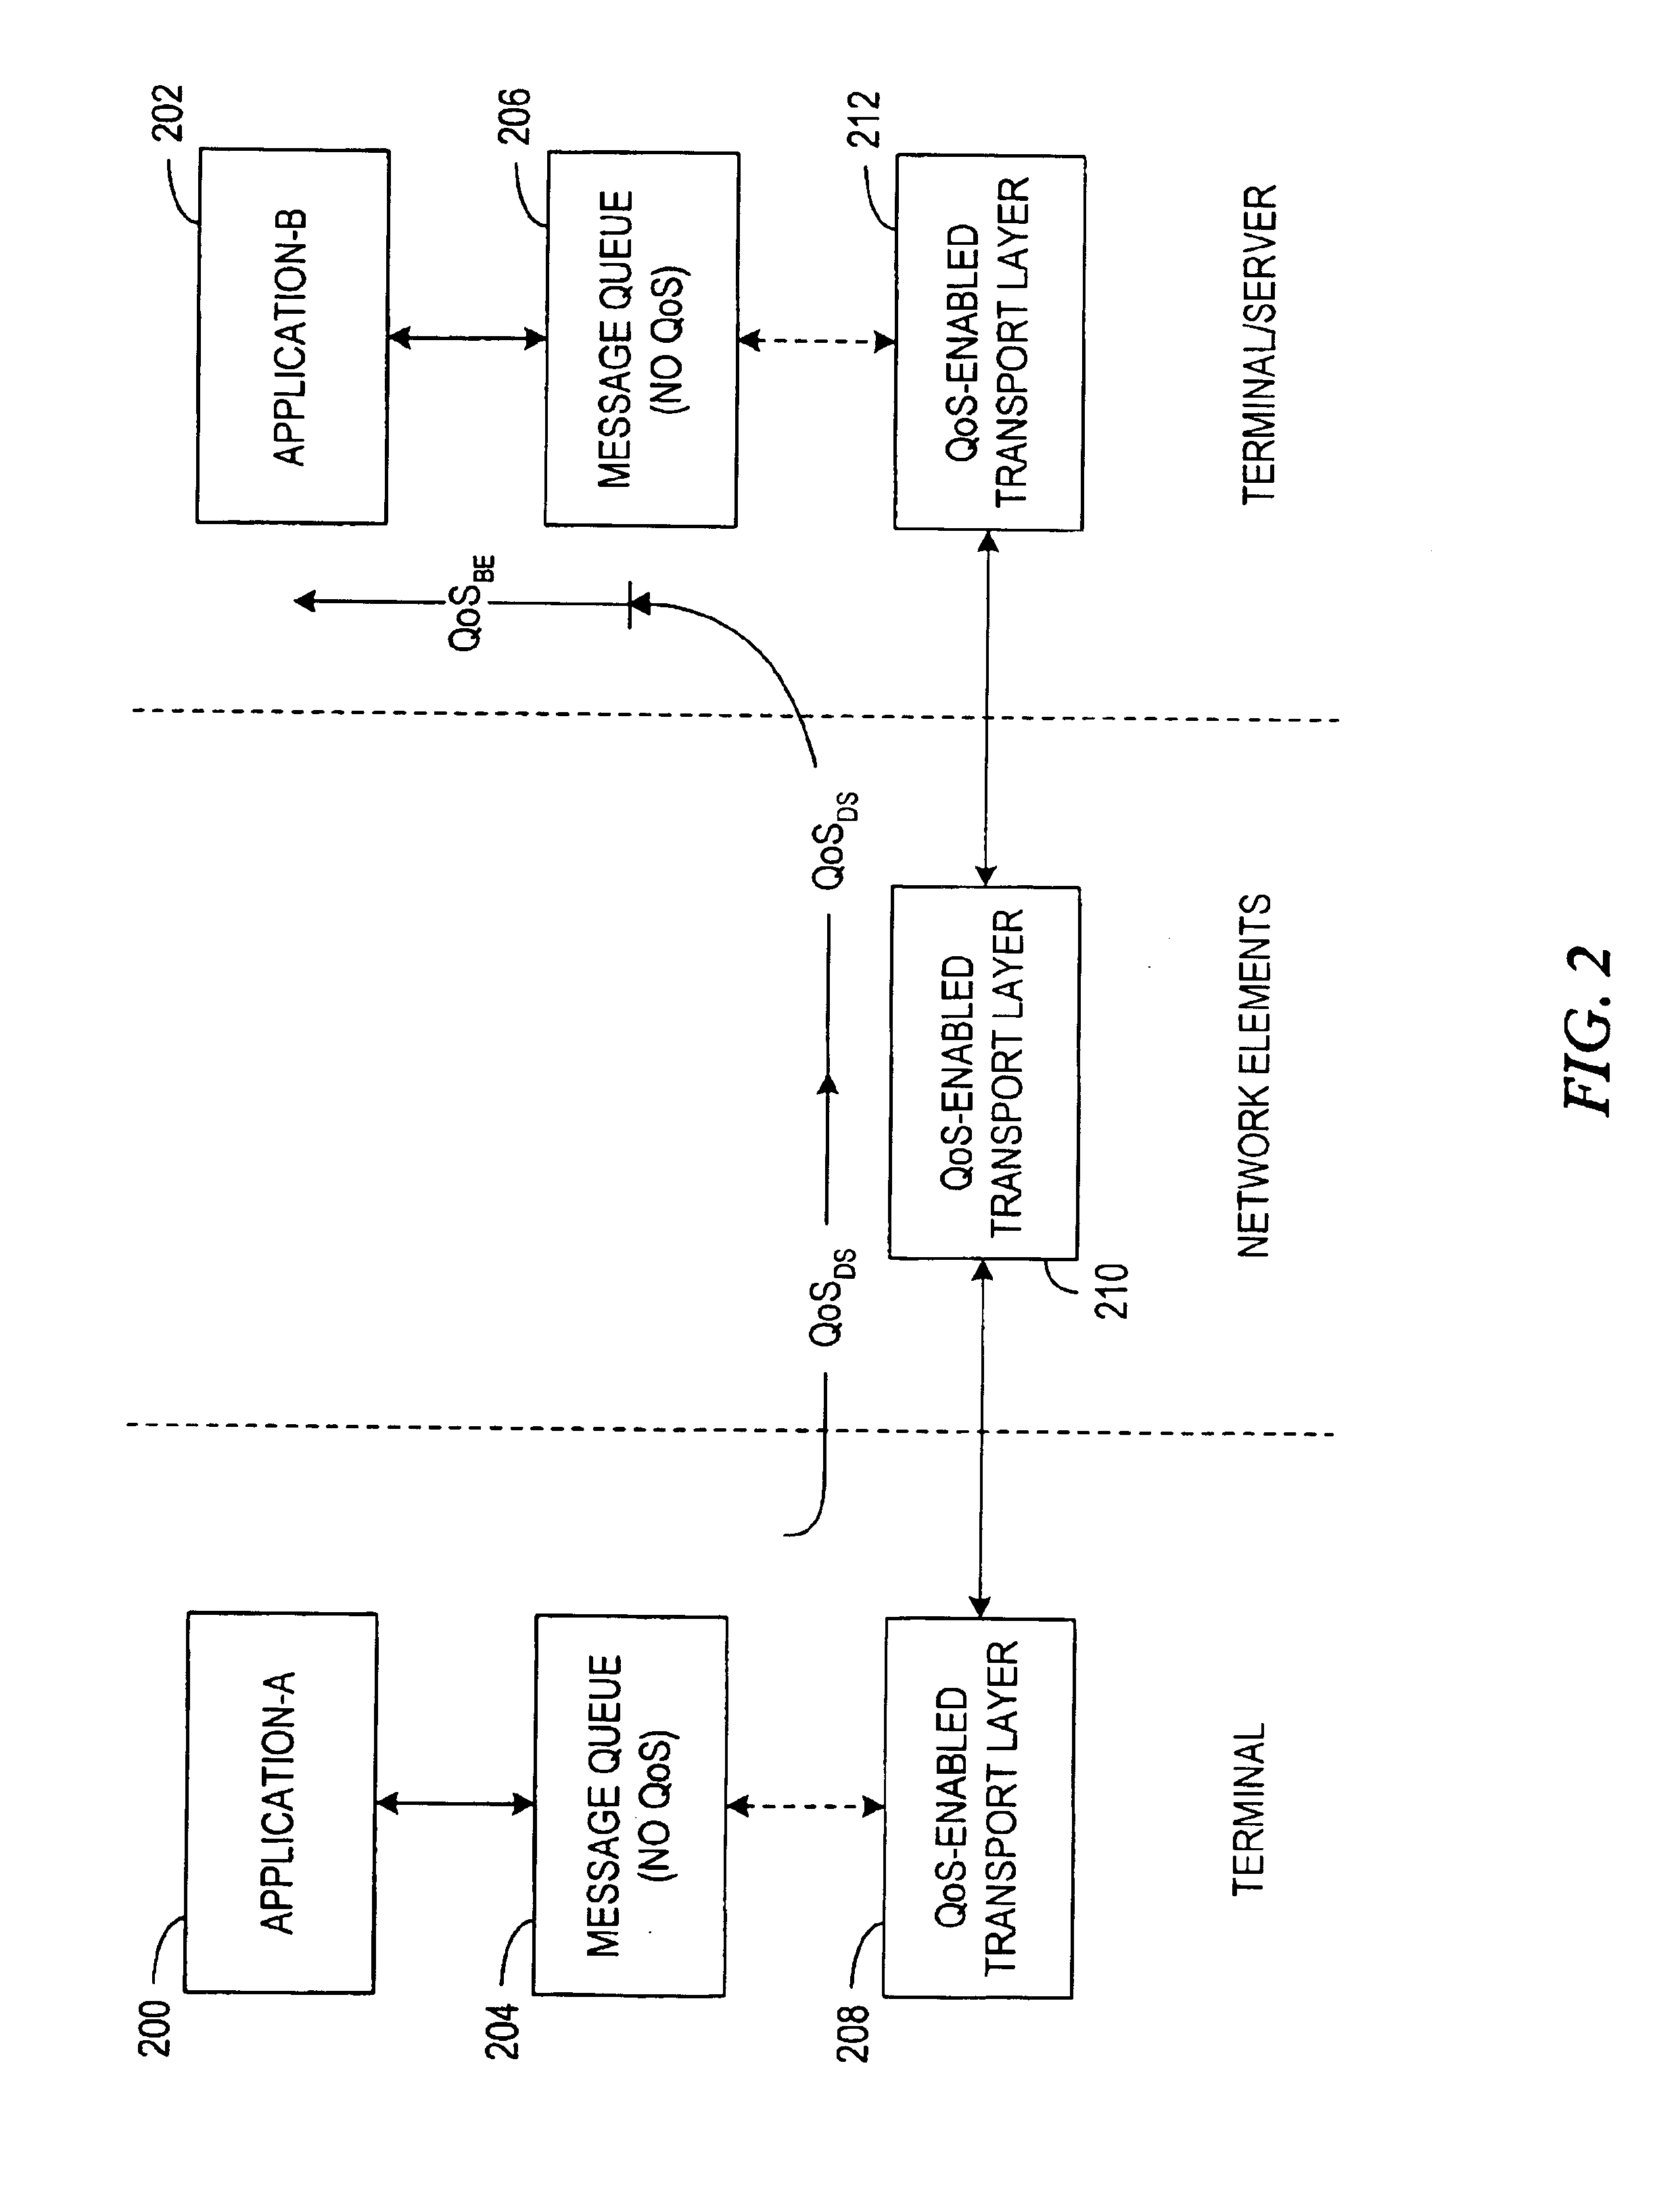 System and method for facilitating end-to-end quality of service in message transmissions employing message queues